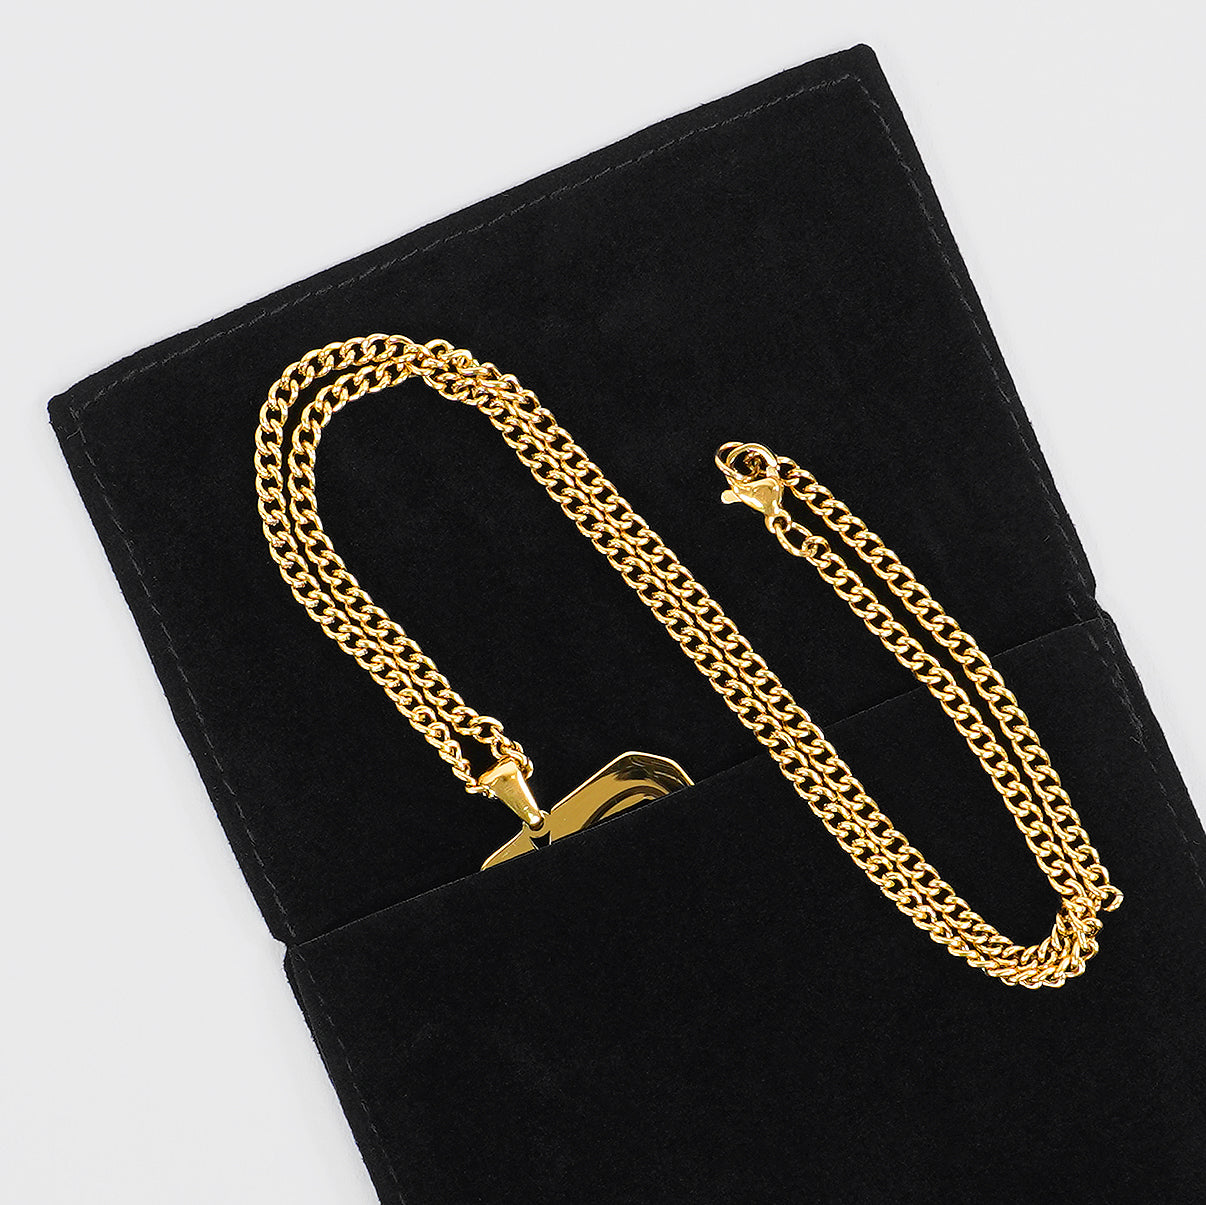 51 Number Pendant with Chain Necklace - Gold Plated Stainless Steel